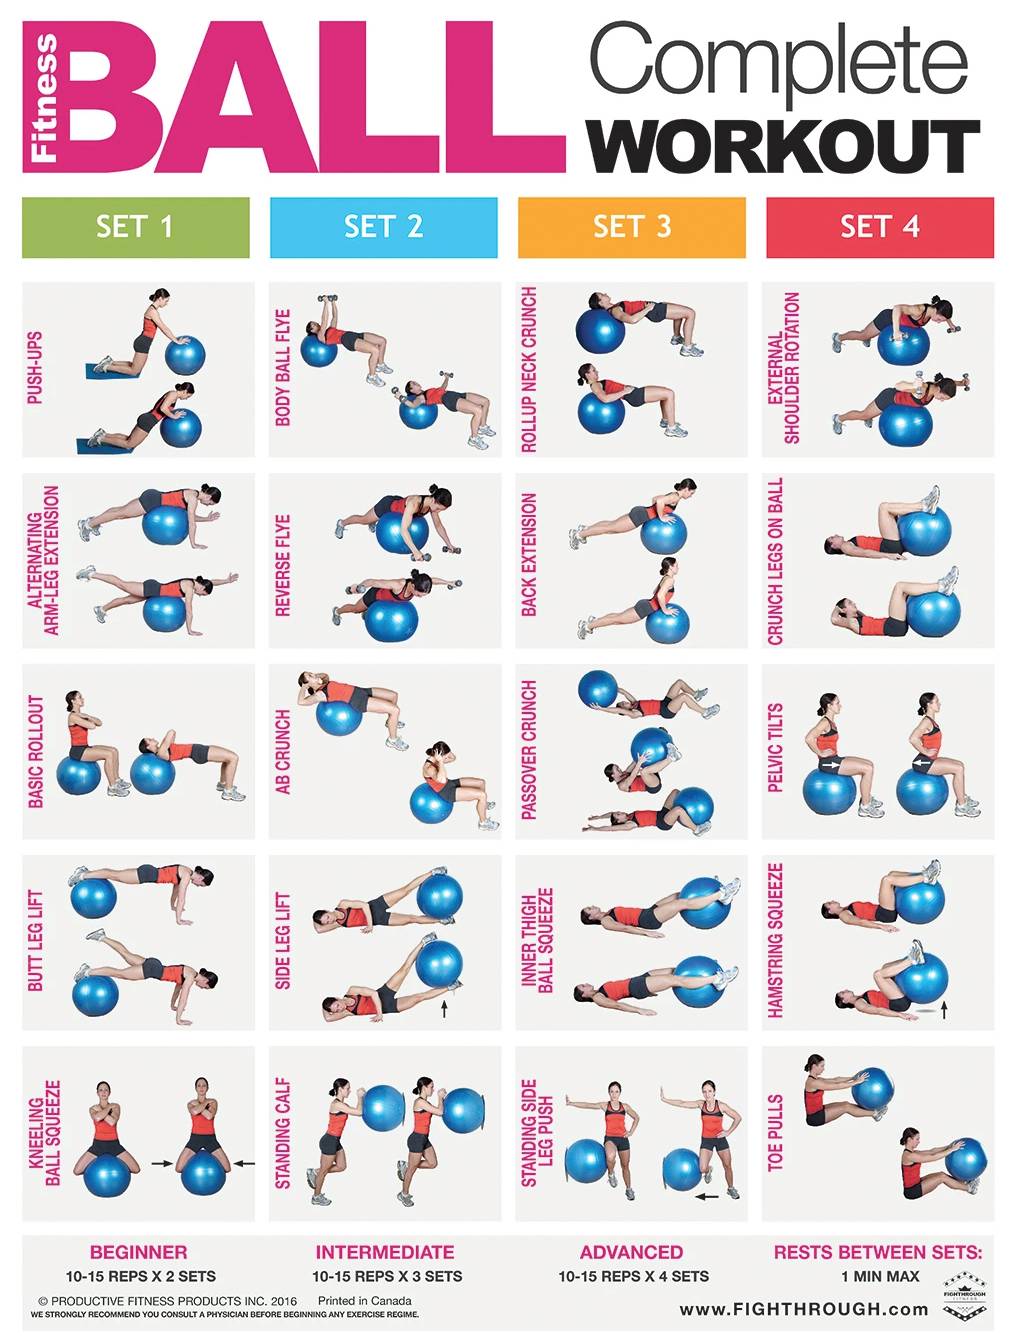 Full body workout set. Exercise for woman. Illustration about life